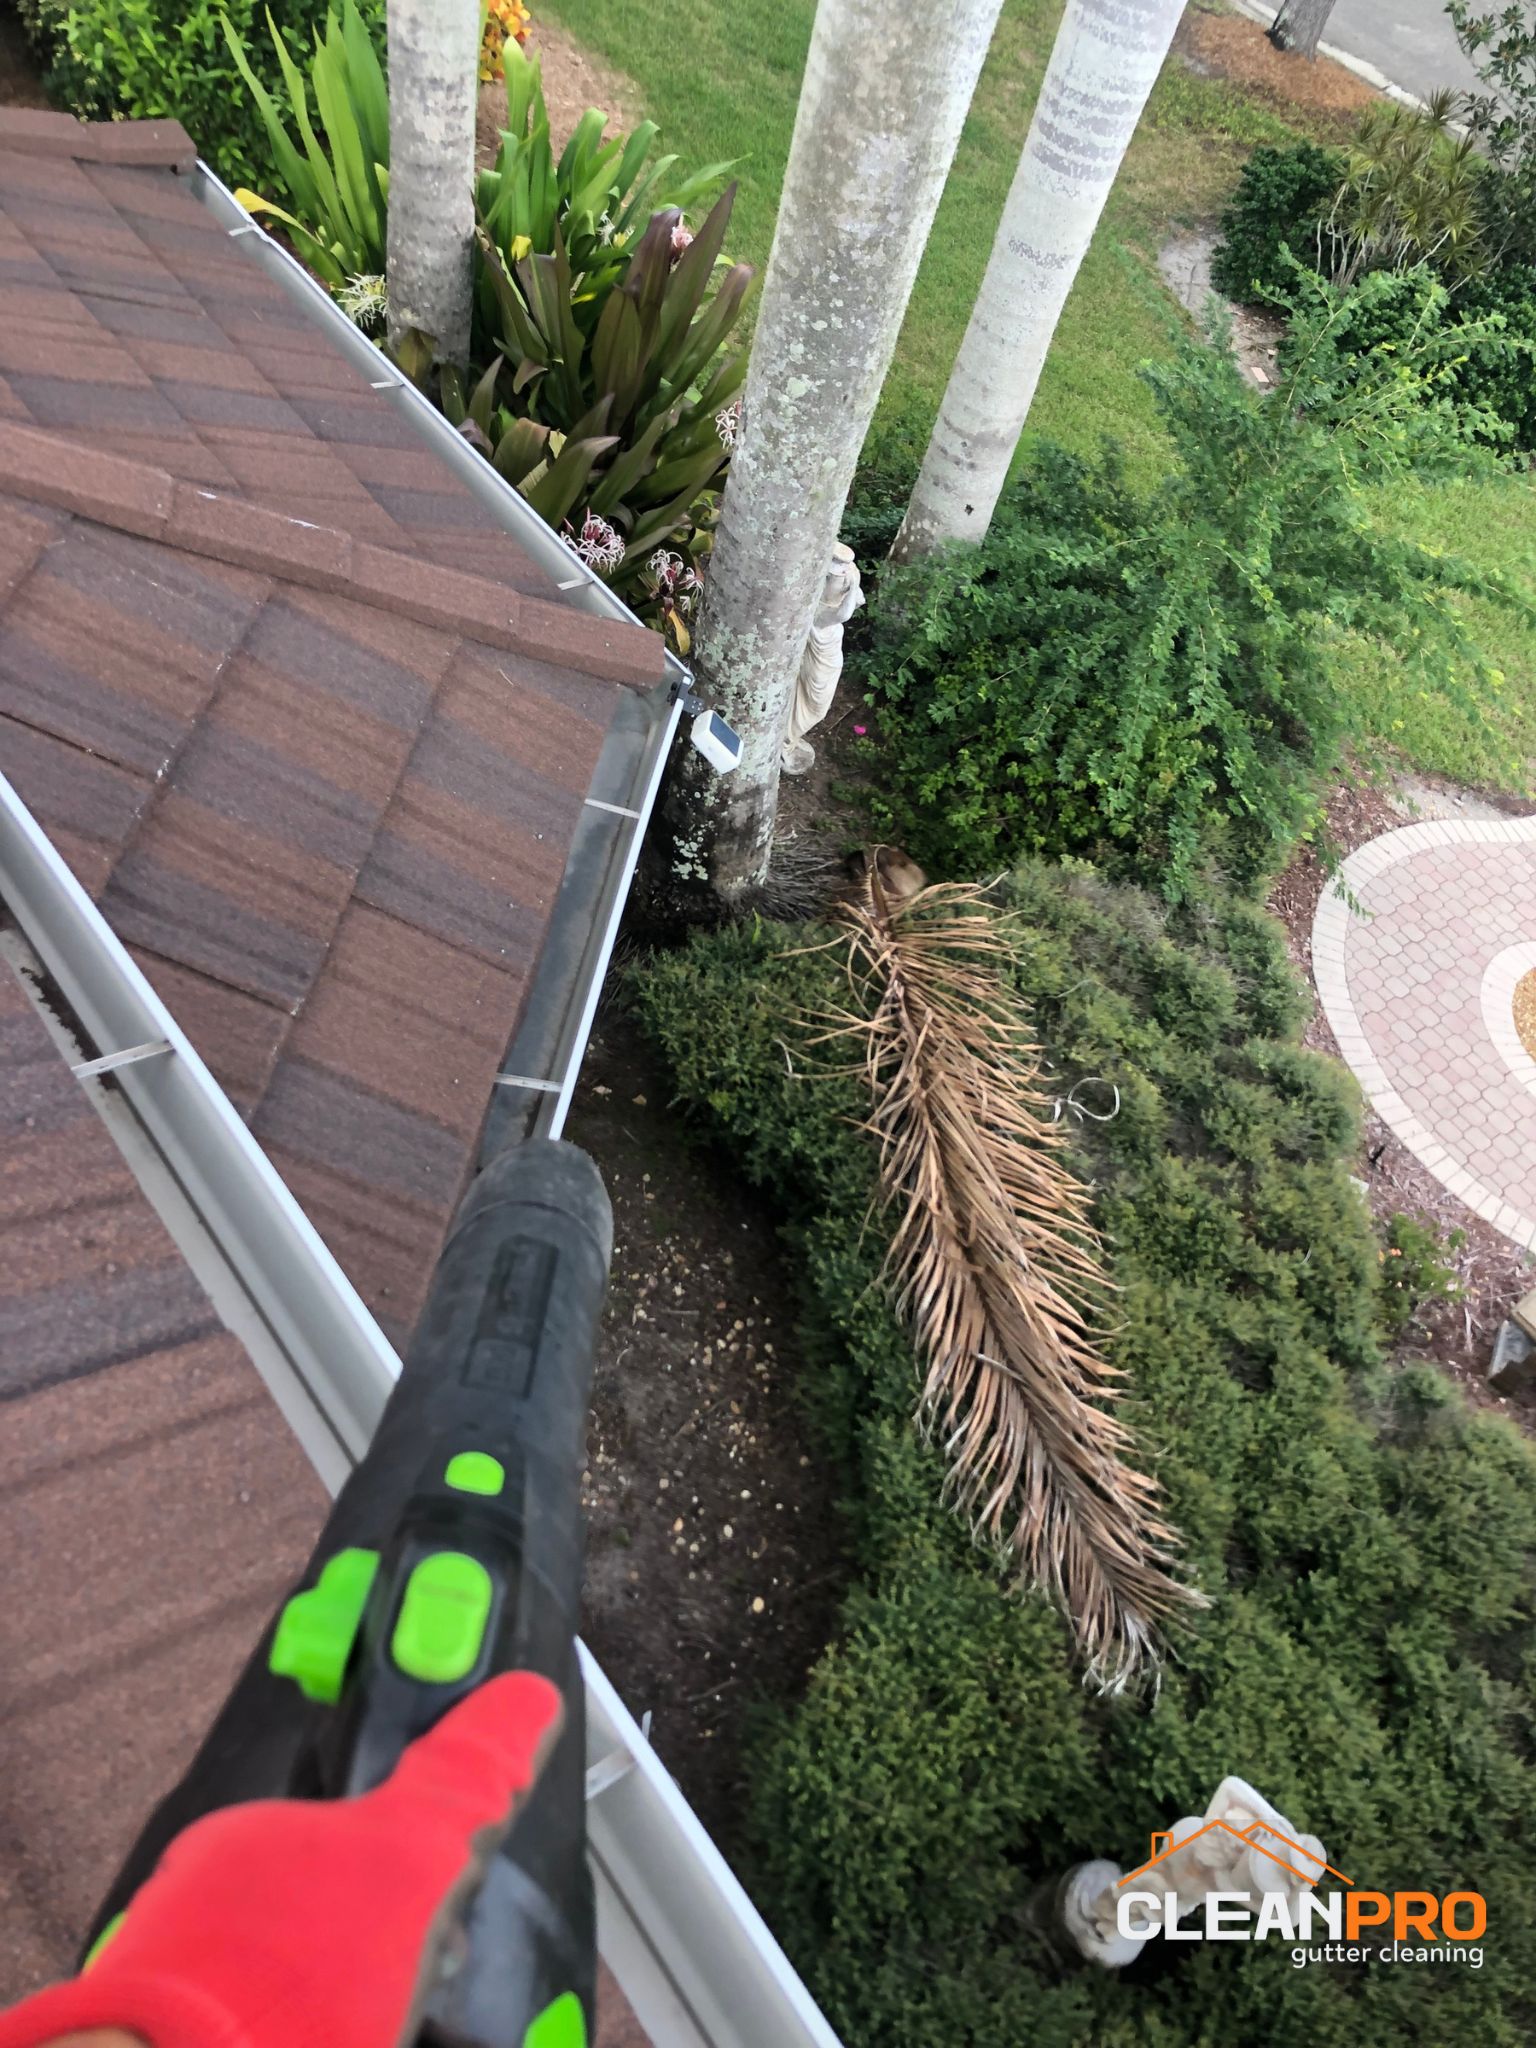 Top Notch Gutter Cleaning Service in Orlando